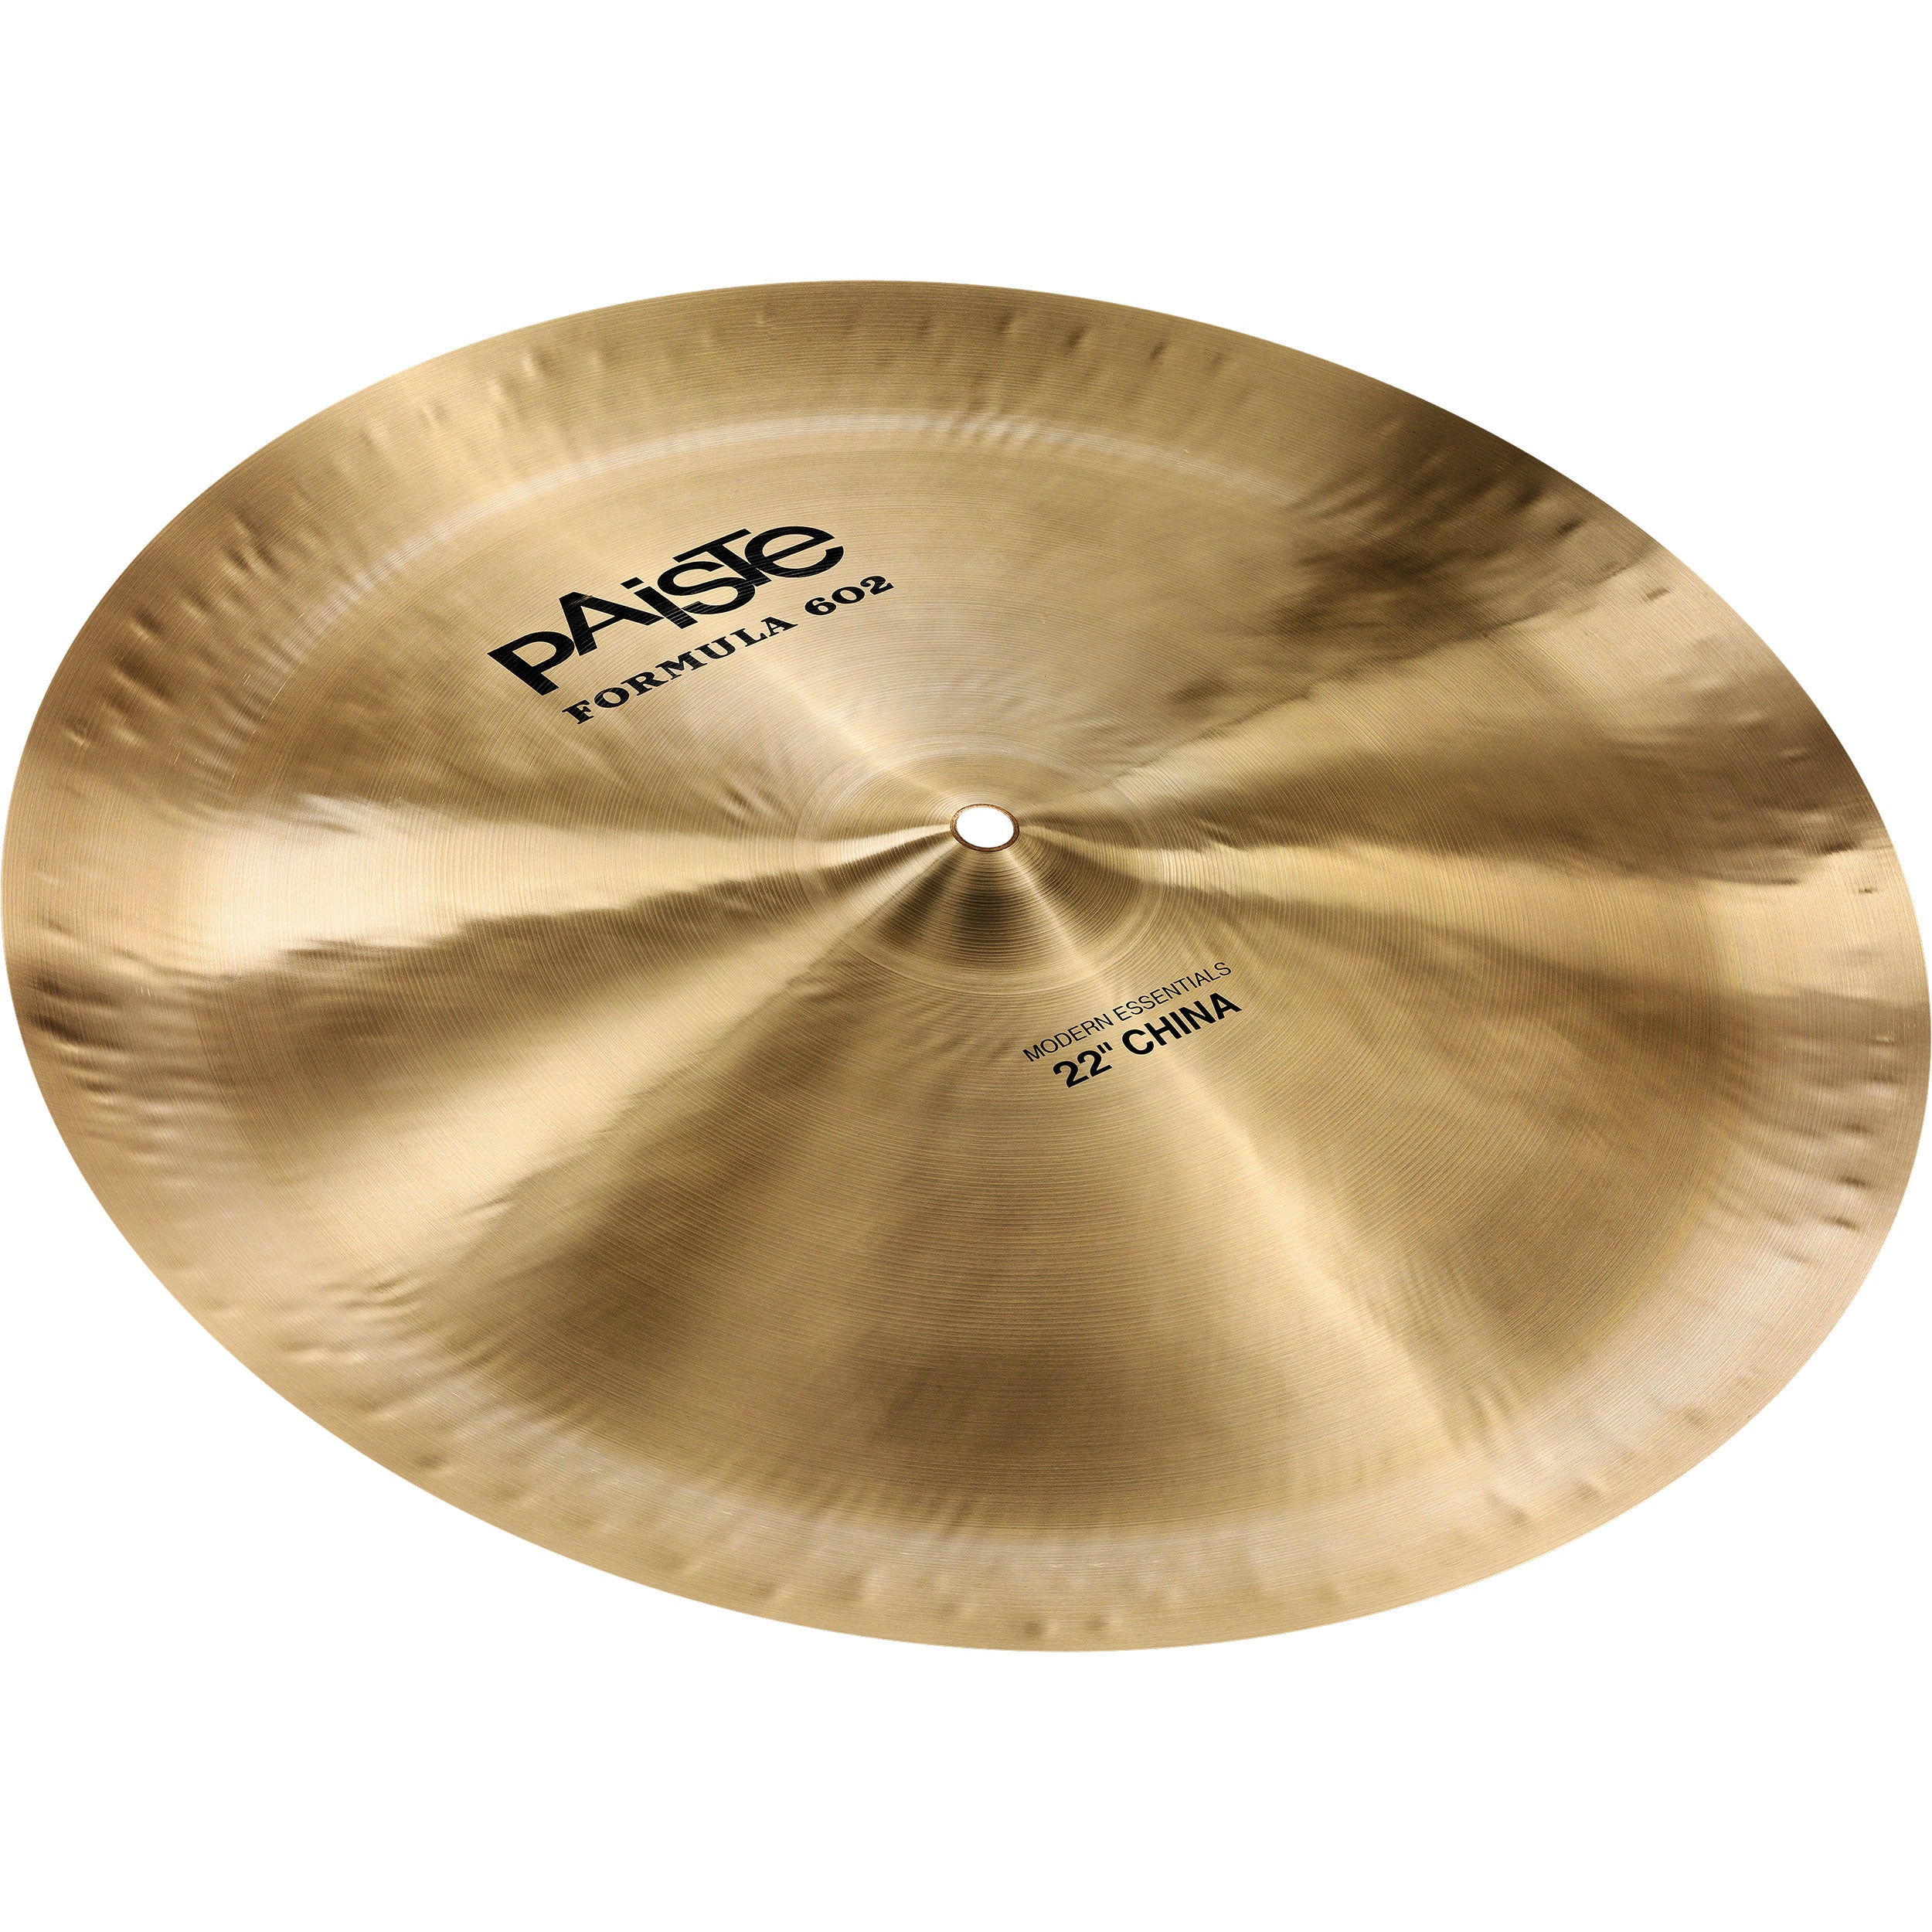 PAISTE Formula 602 Modern Essentials China Cymbal (Available in 18" & 22")